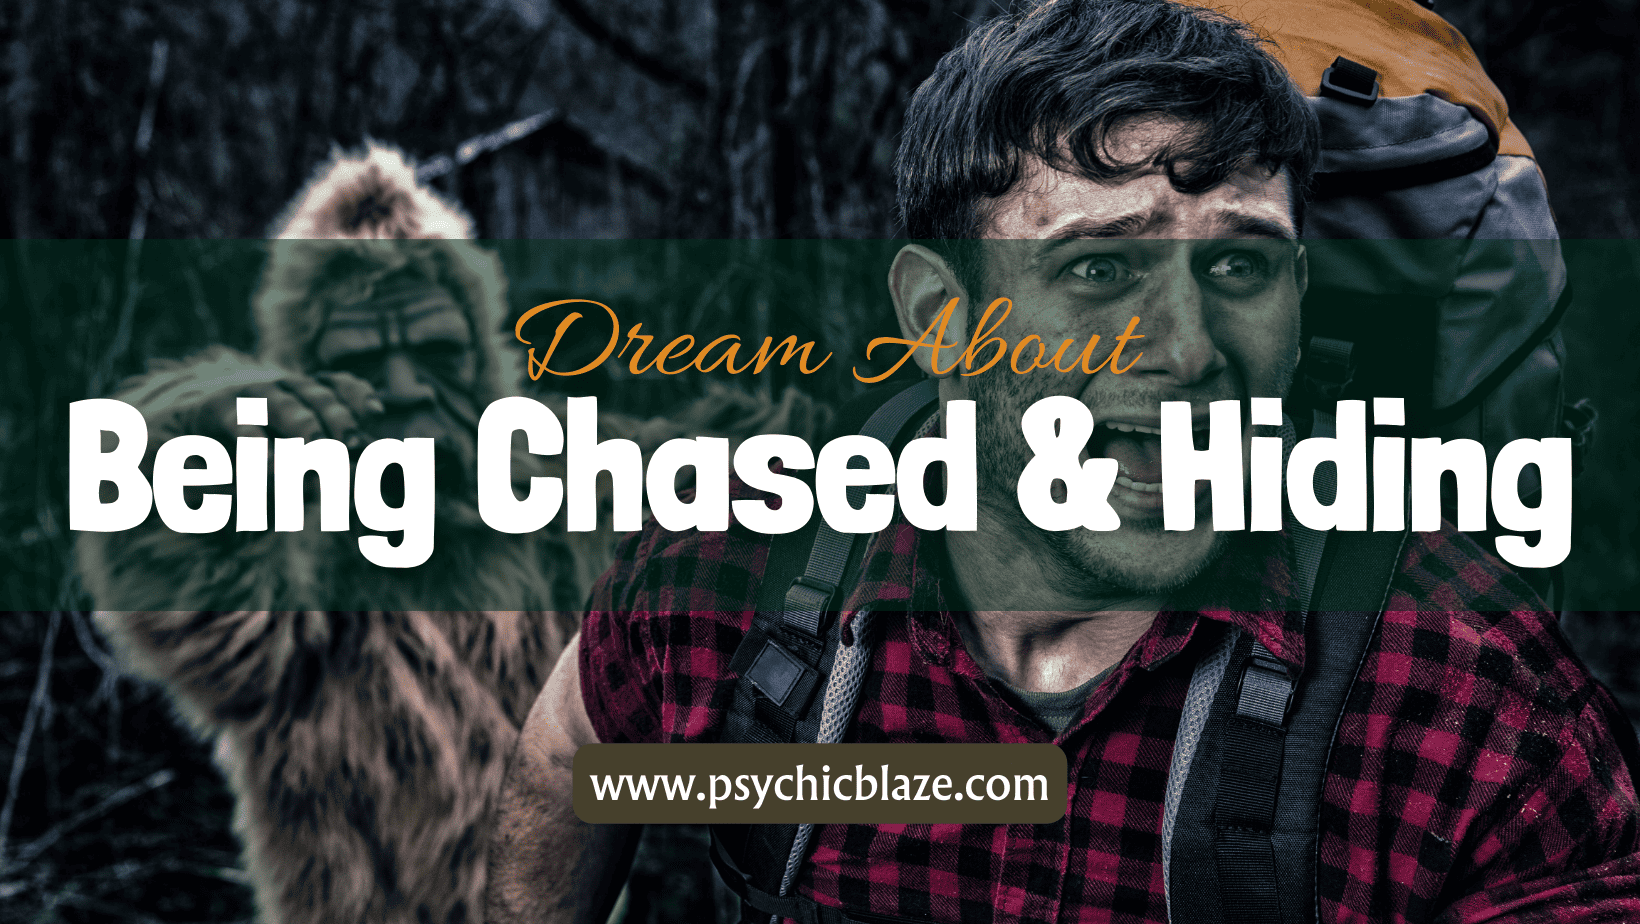 Dream about Being Chased & Hiding